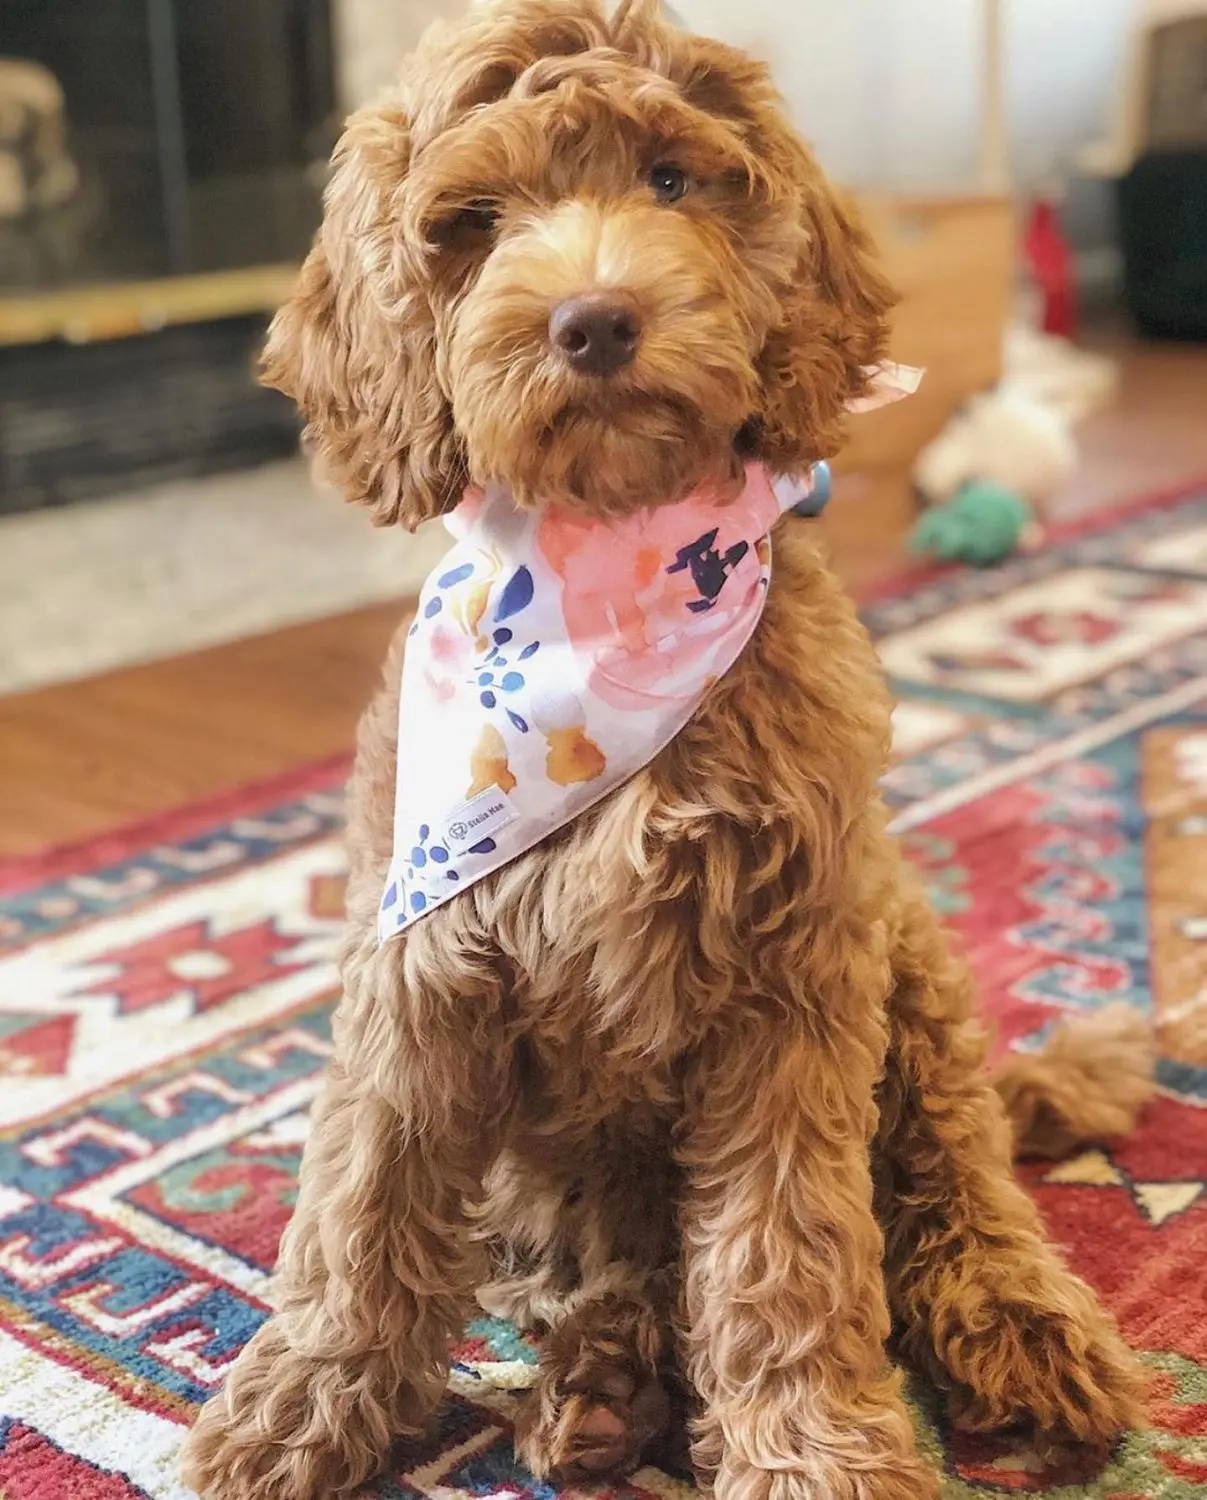 The f1bb golden doodle in the adolescence phase is a cute and playful pup. His golden fur is soft and shiny, and his loving eyes are full of mischief. This young dog is full of energy and loves to play, but he's also a loyal and affectionate companion.